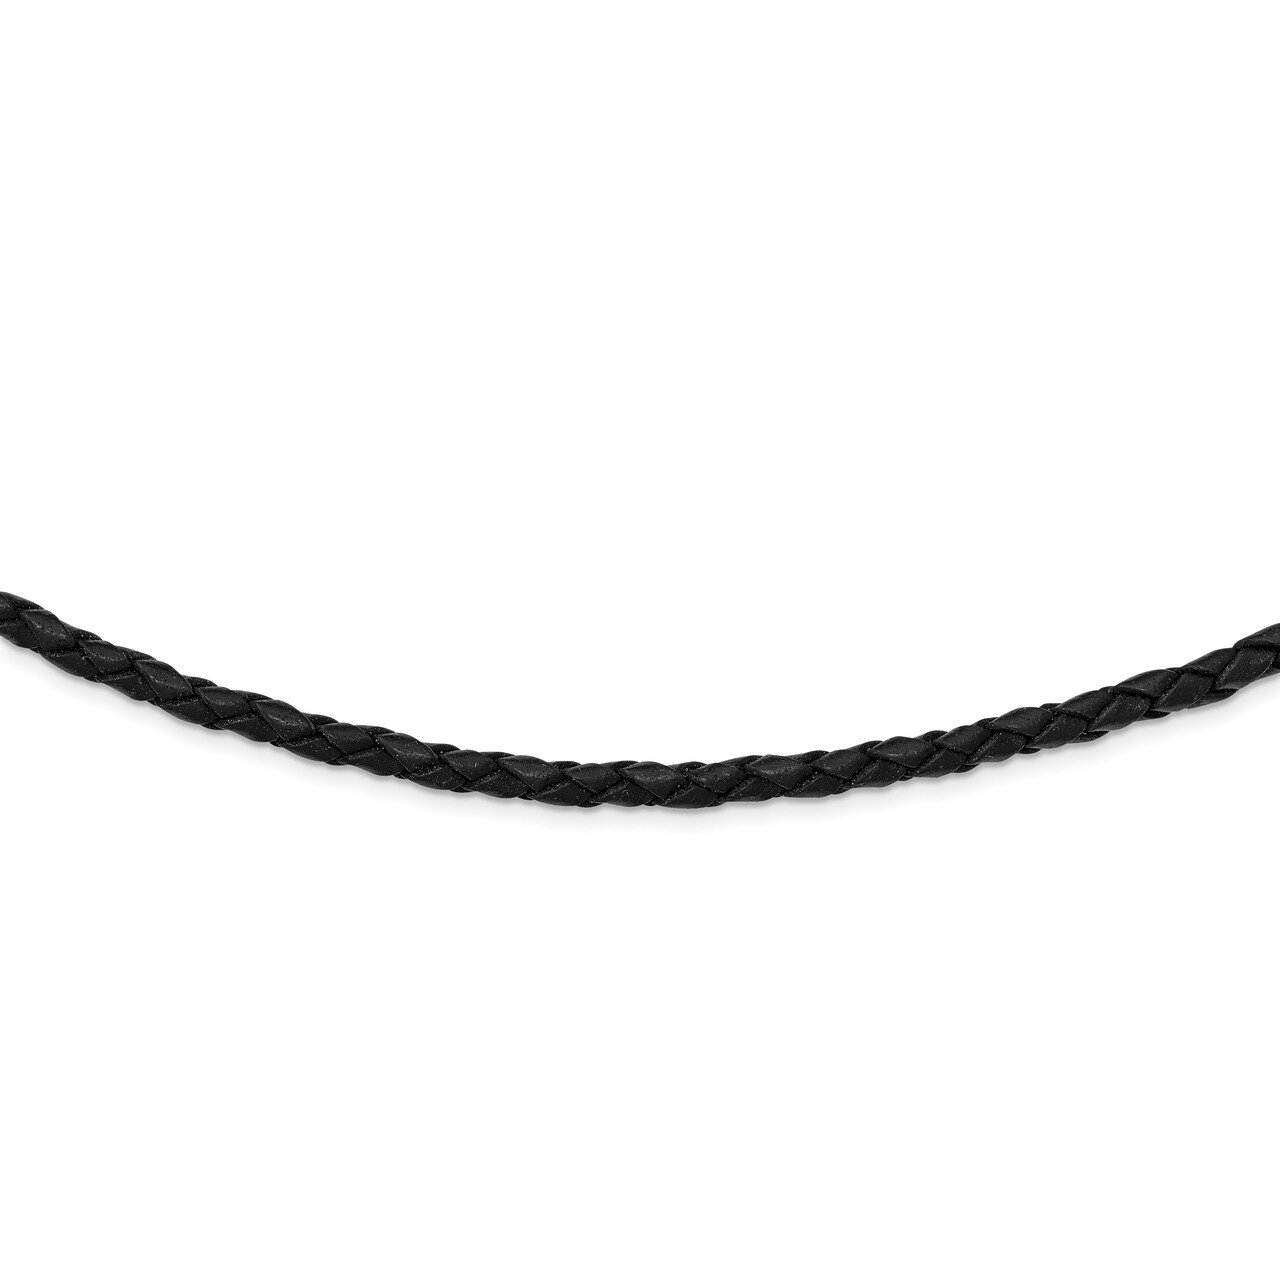 4mm Black Leather Braided Necklace 18 Inch Sterling Silver QK89-18